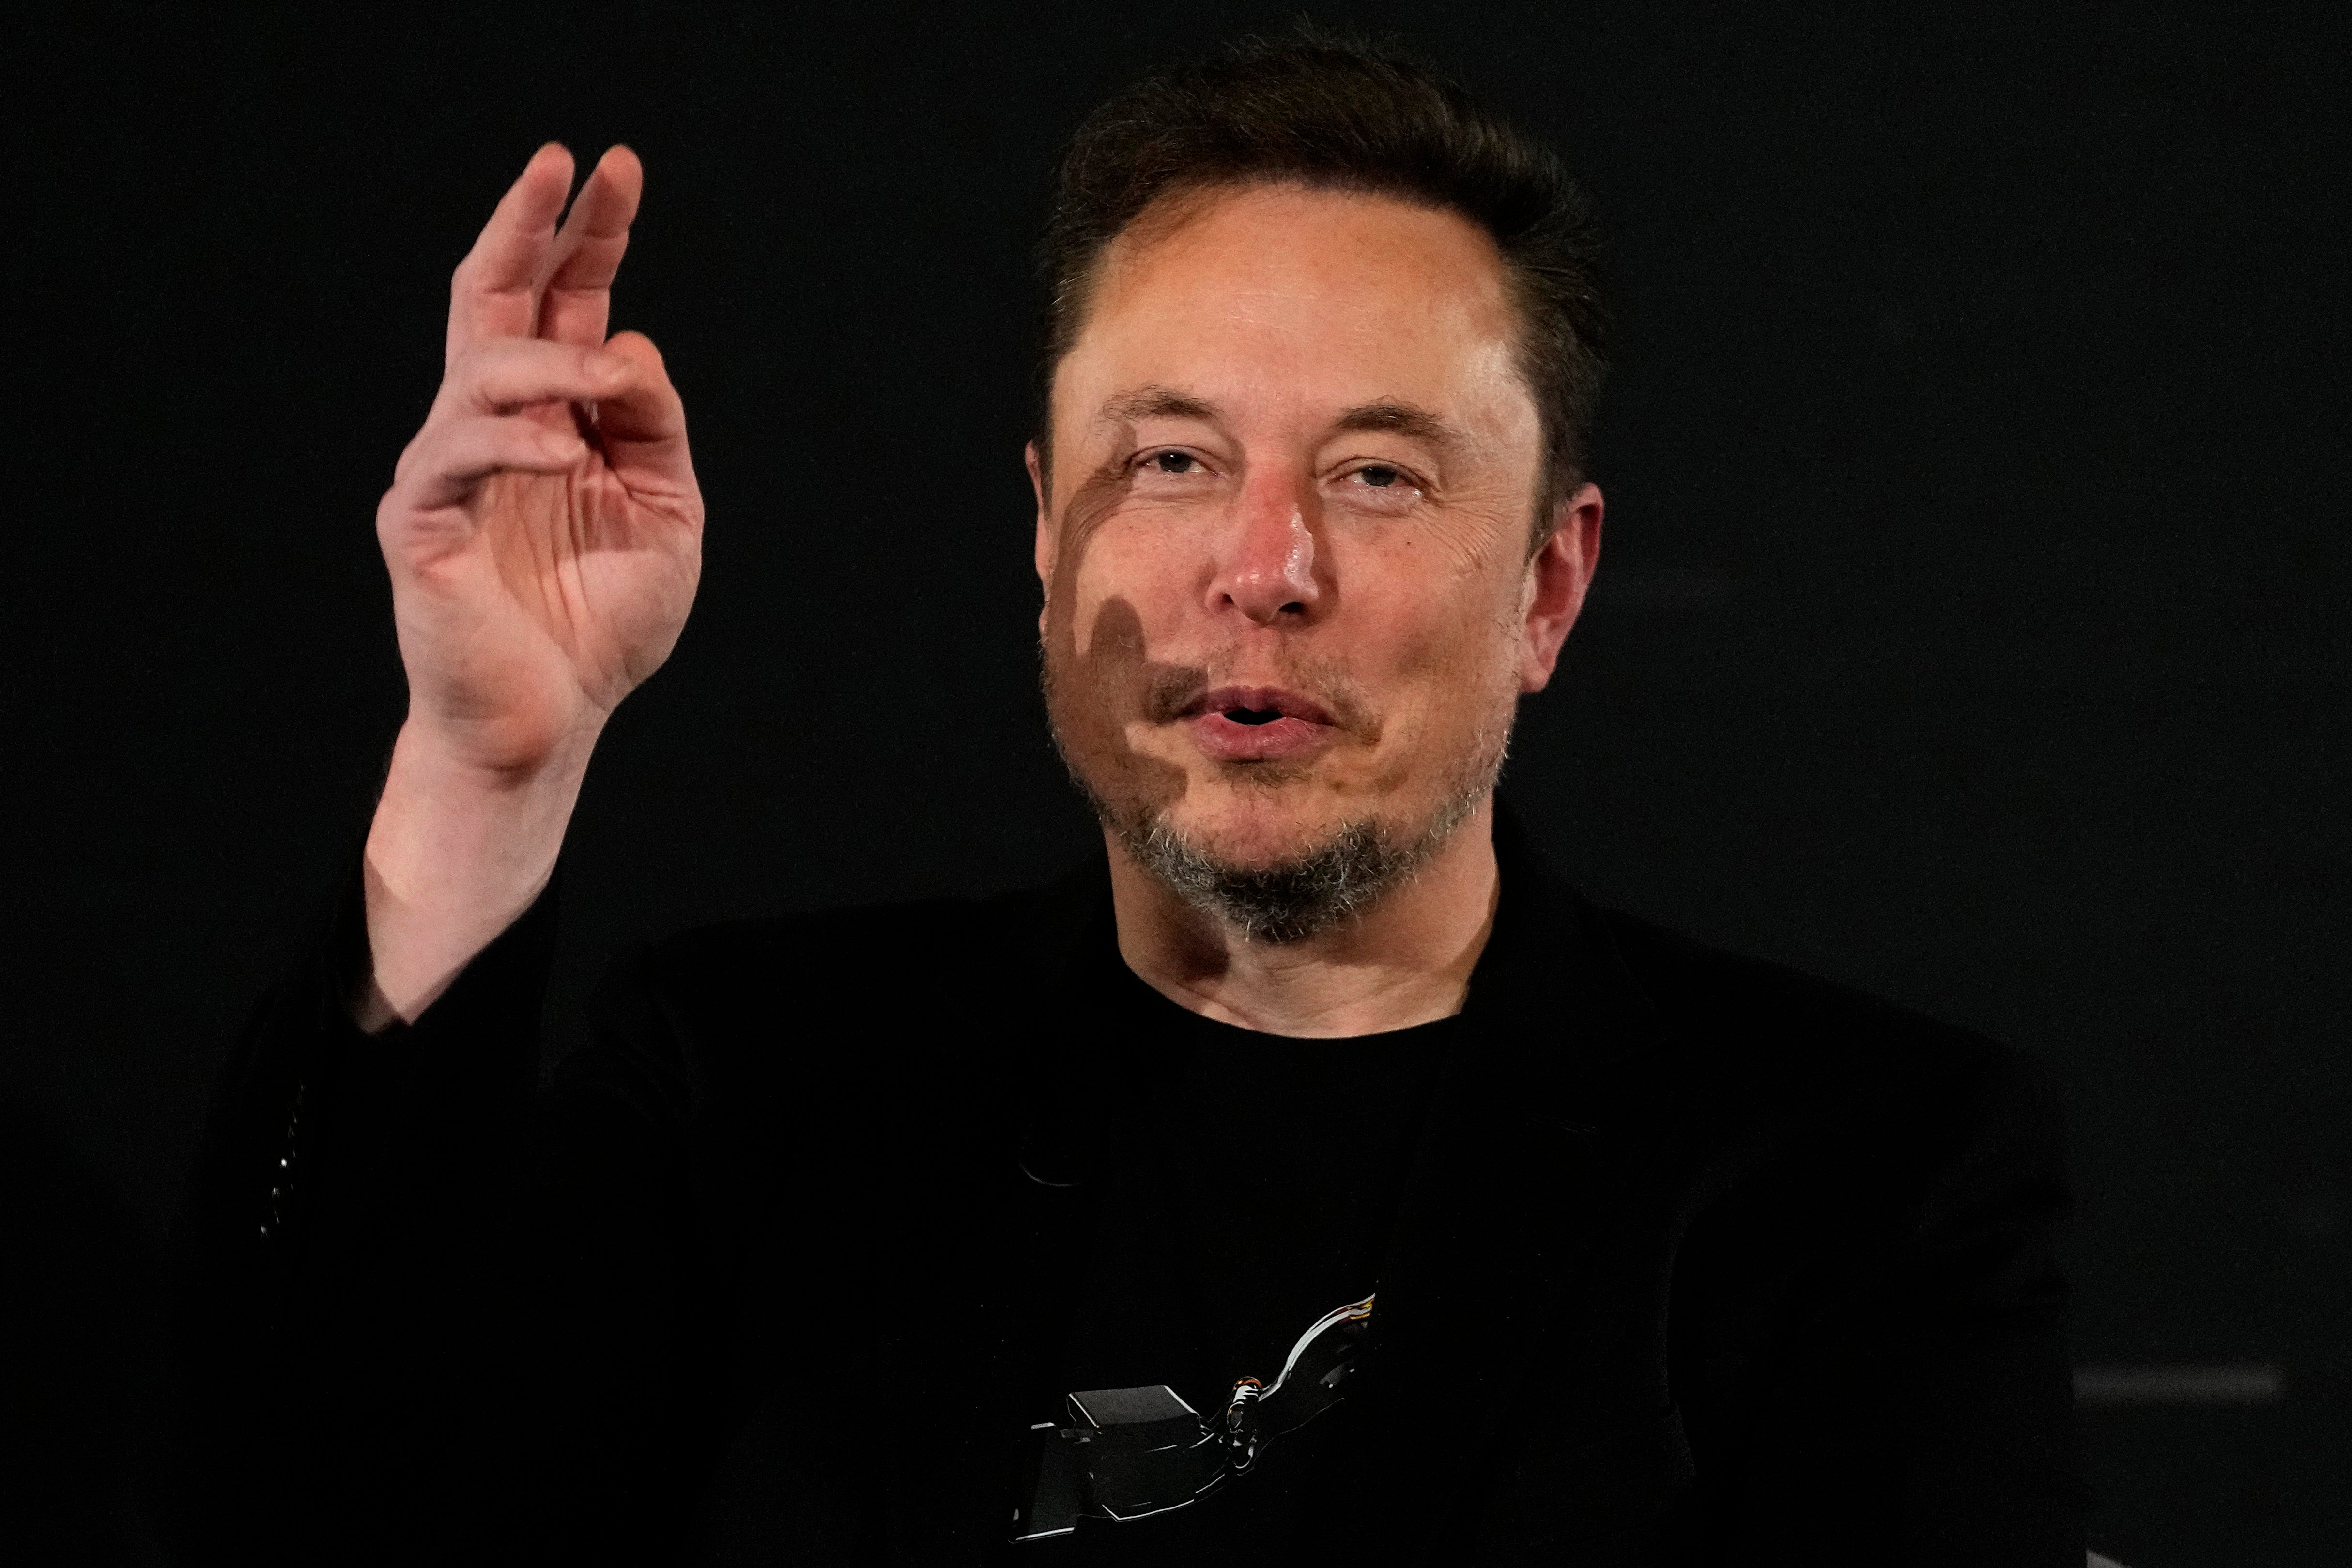 A group of nearly 30 House Democrats has accused Elon Musk and X of profiting from Hamas propaganda